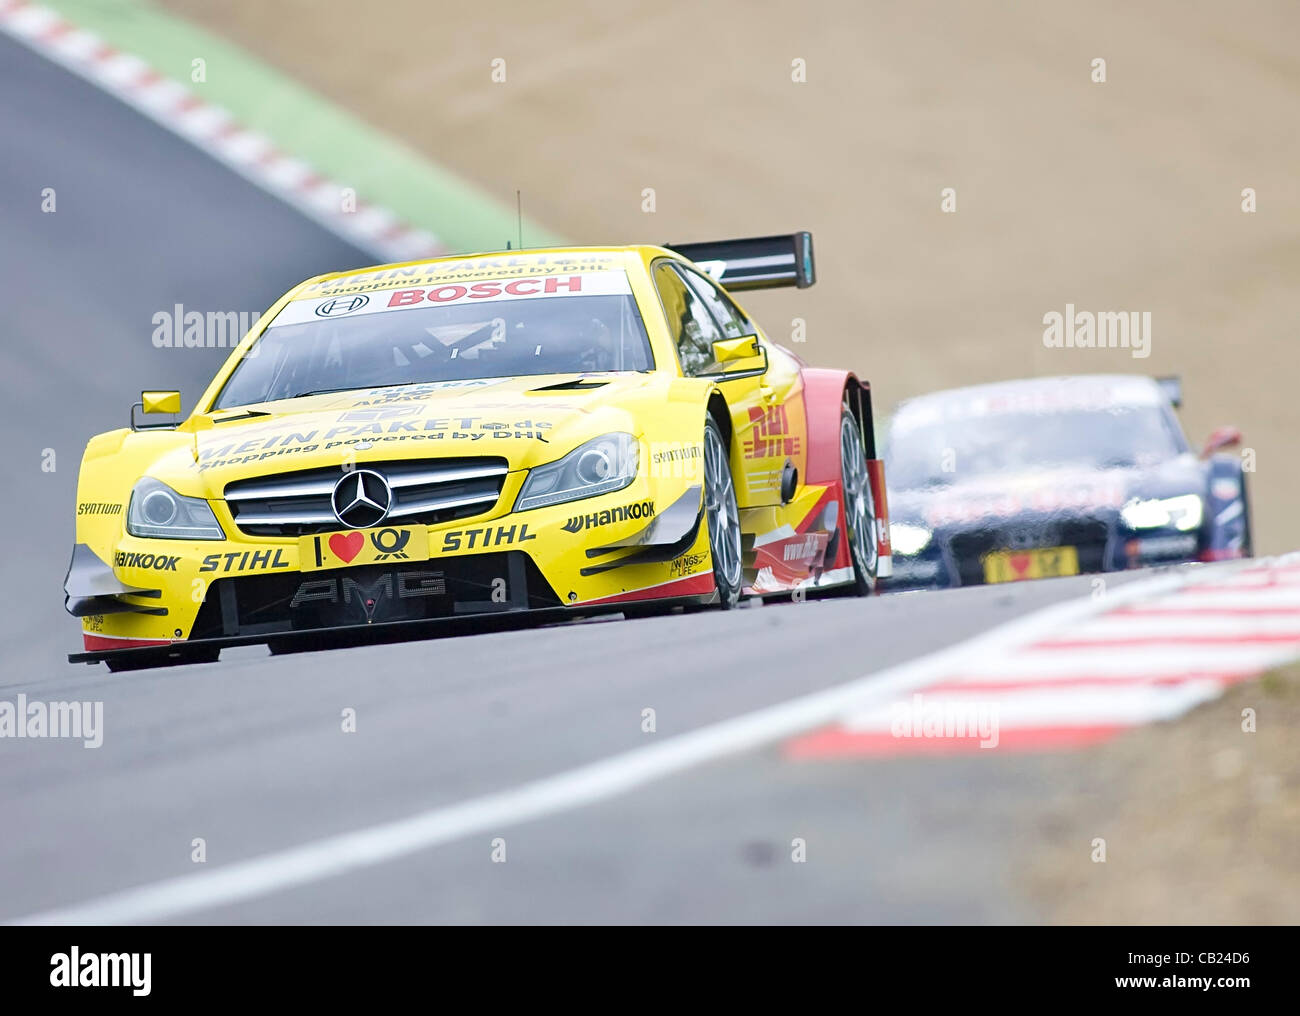 18.05.2012 Brands Hatch, David coulthard (SCO) driving the DHL Paket  Mercedes AMG C-Coupe in action during Friday's free practice in the 2012  DTM Championship, Kent, England Stock Photo - Alamy